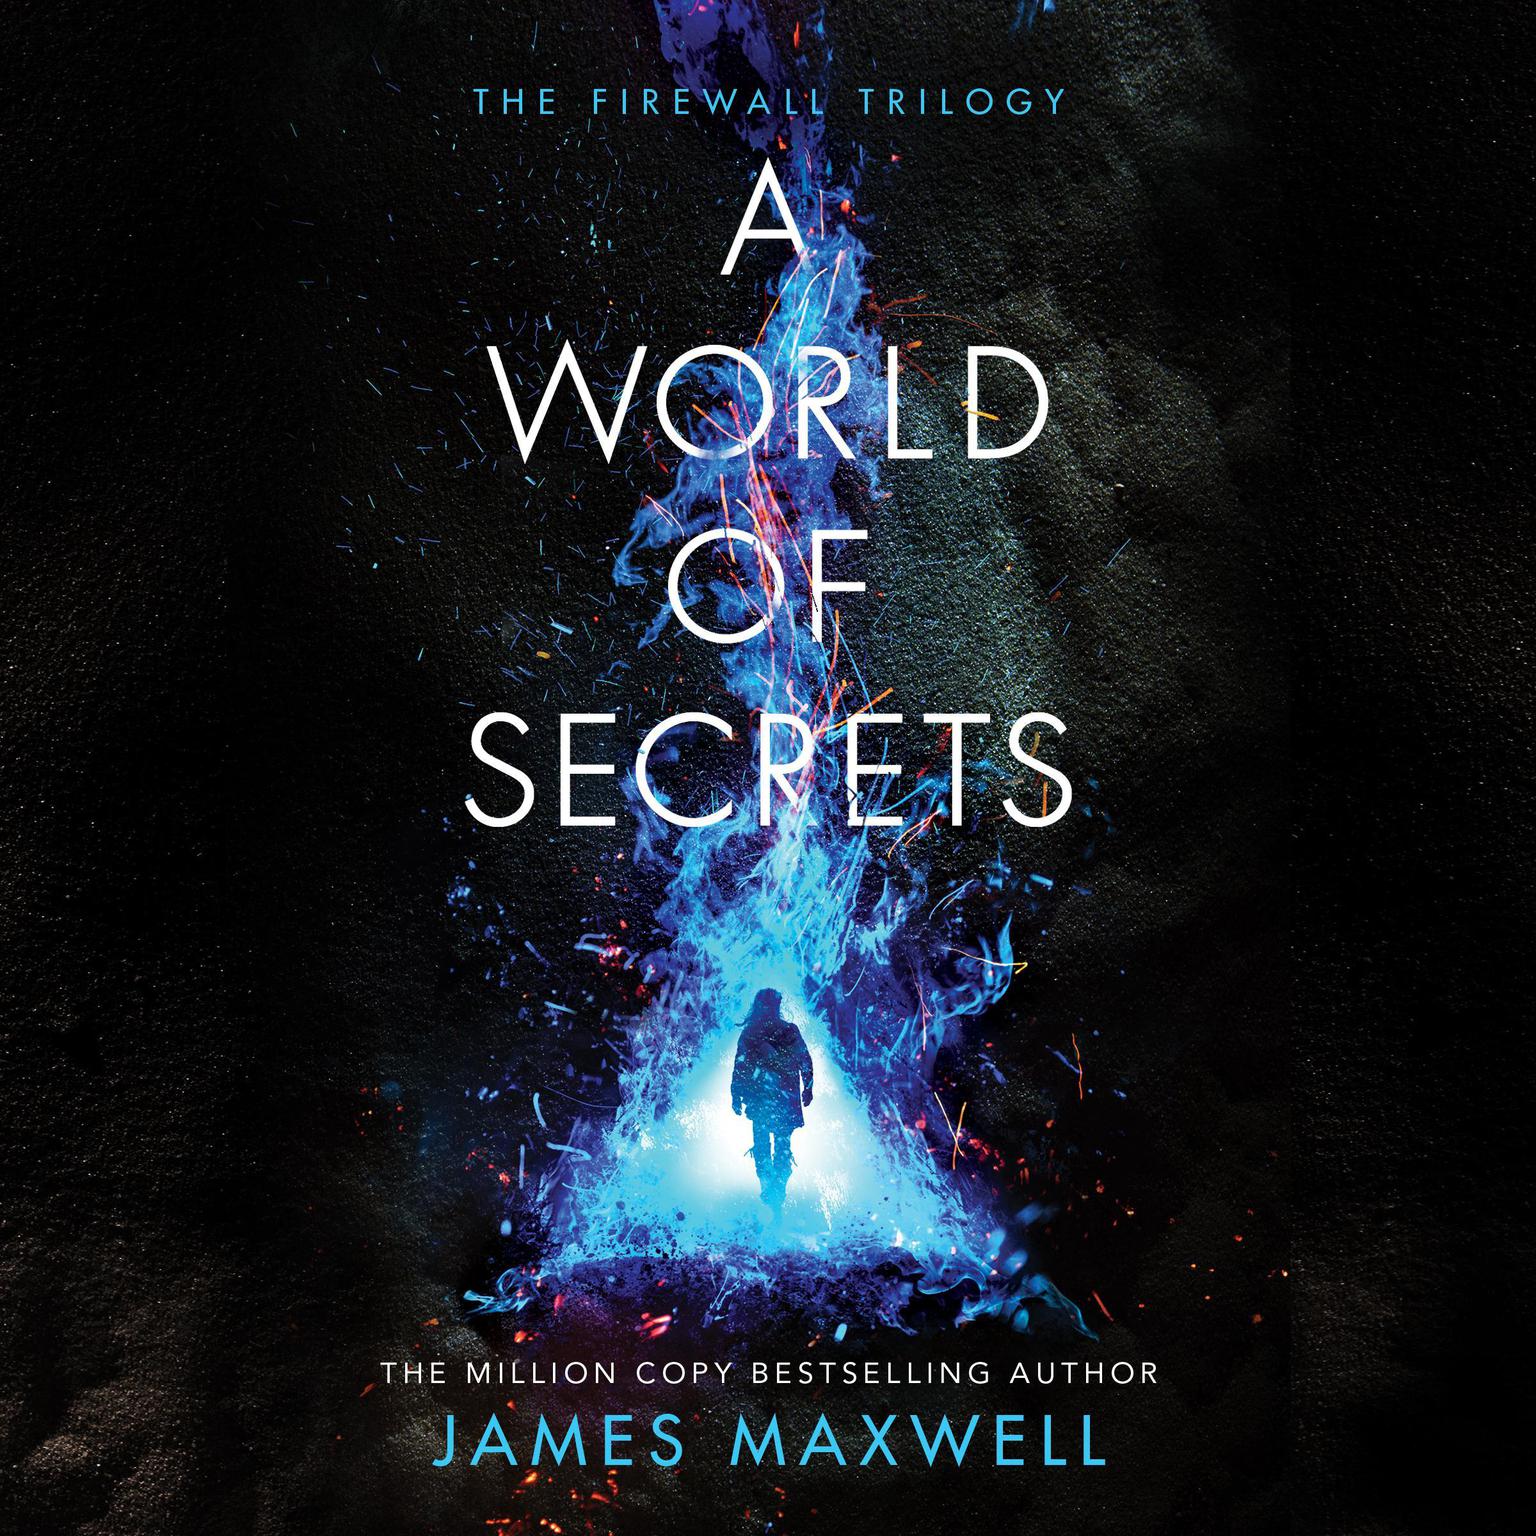 A World of Secrets Audiobook, by James Maxwell